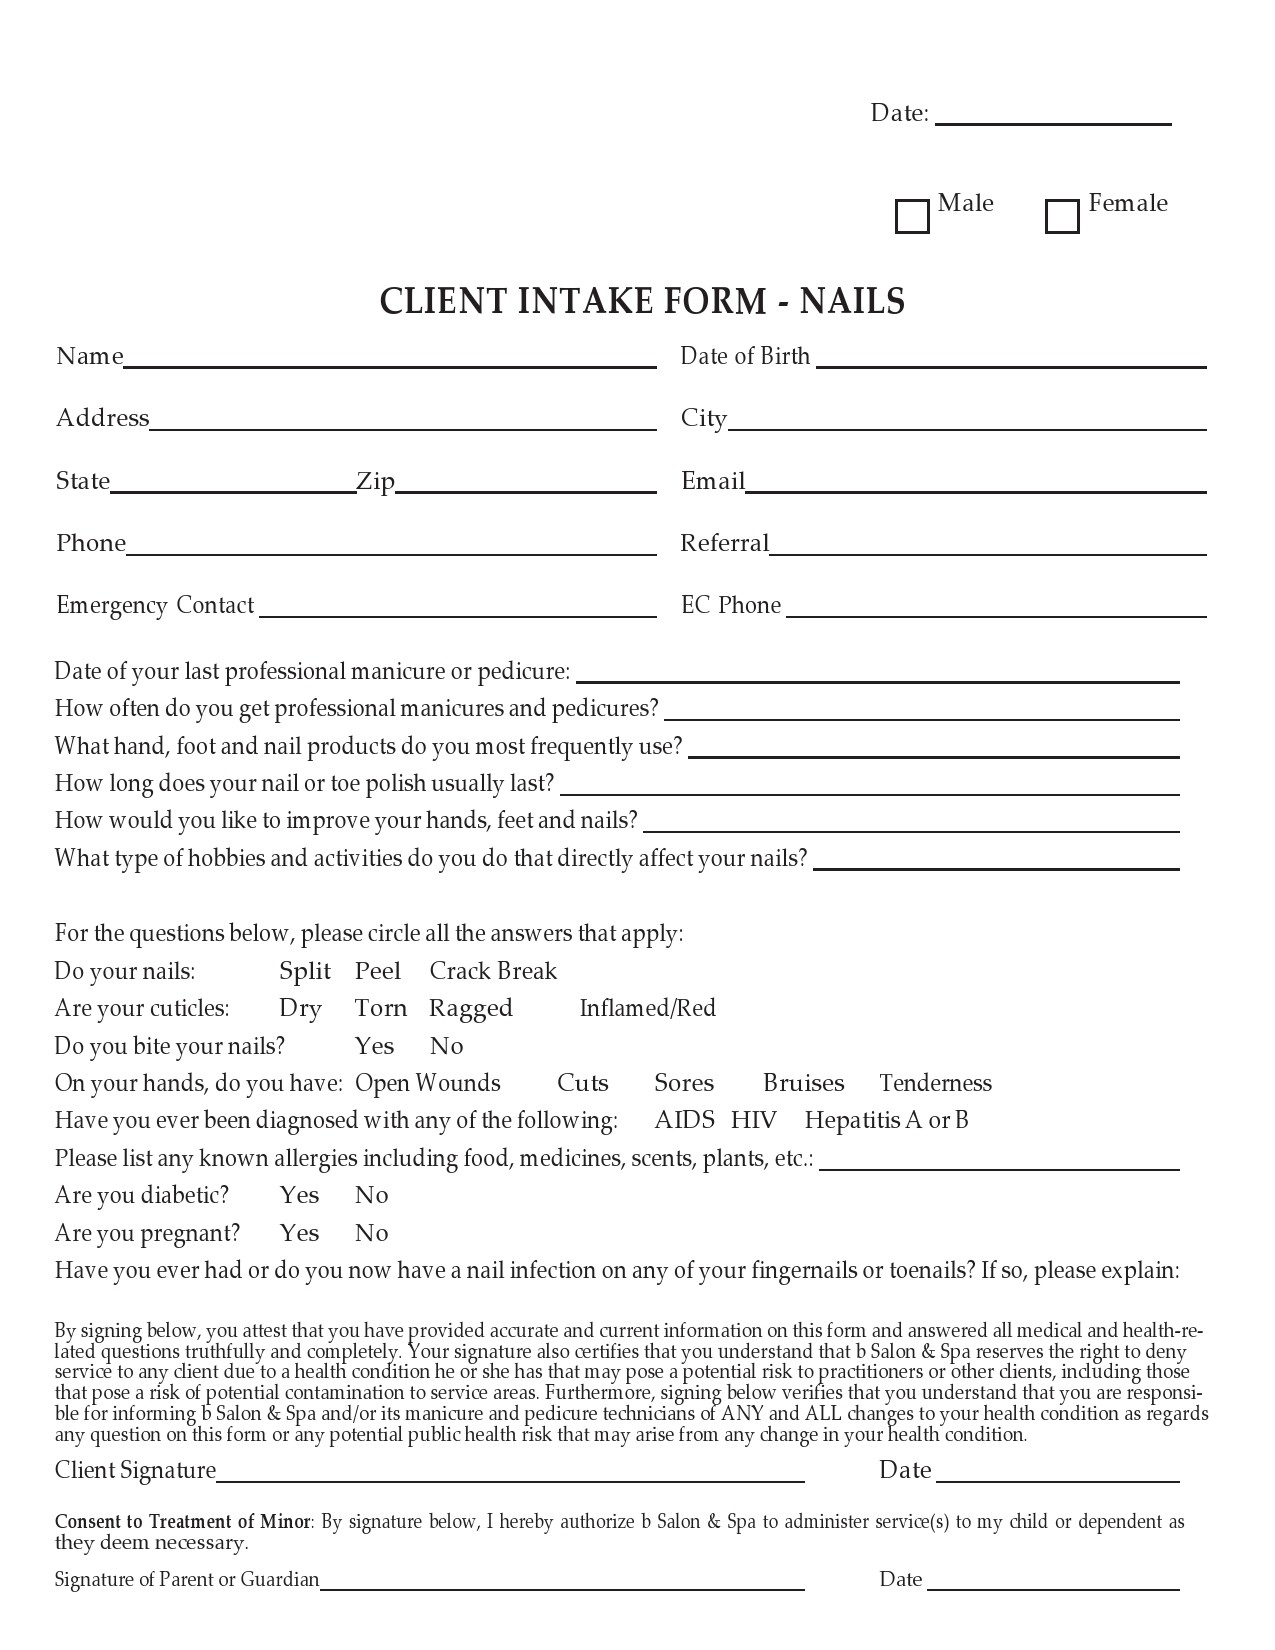 Free client intake form 37